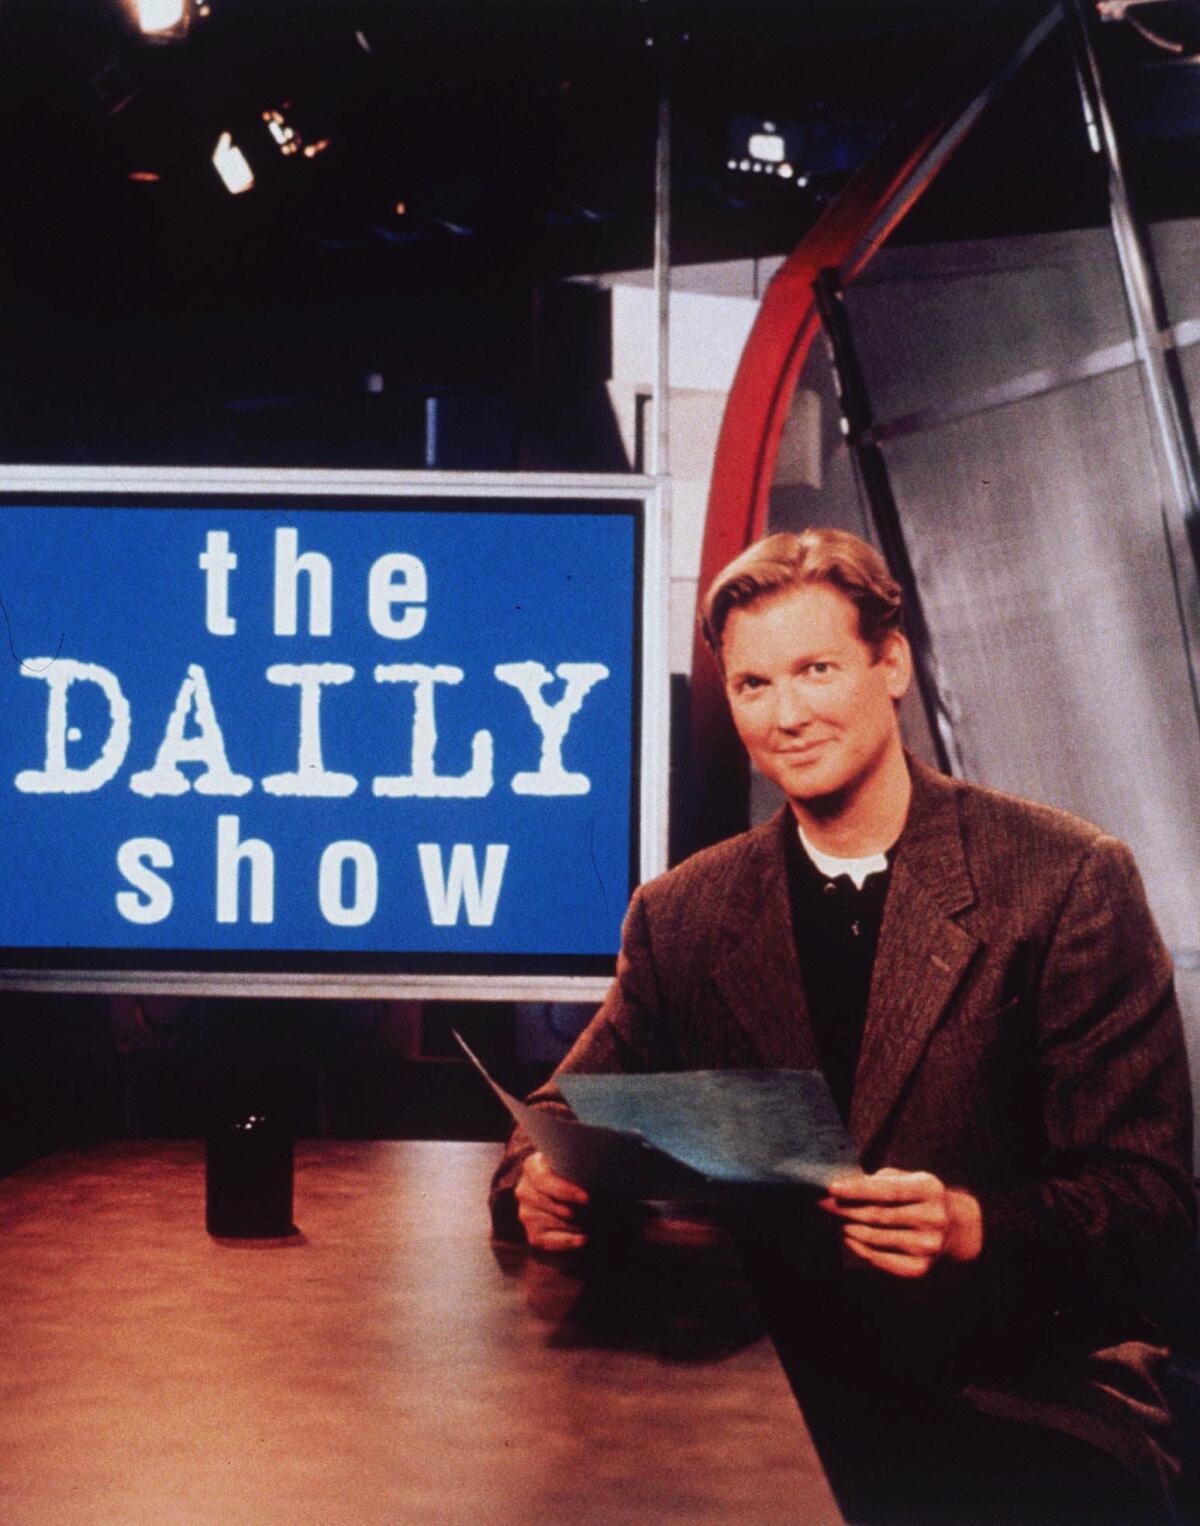 Craig Kilborn, the first host of “The Daily Show,” poses on set in 1997.